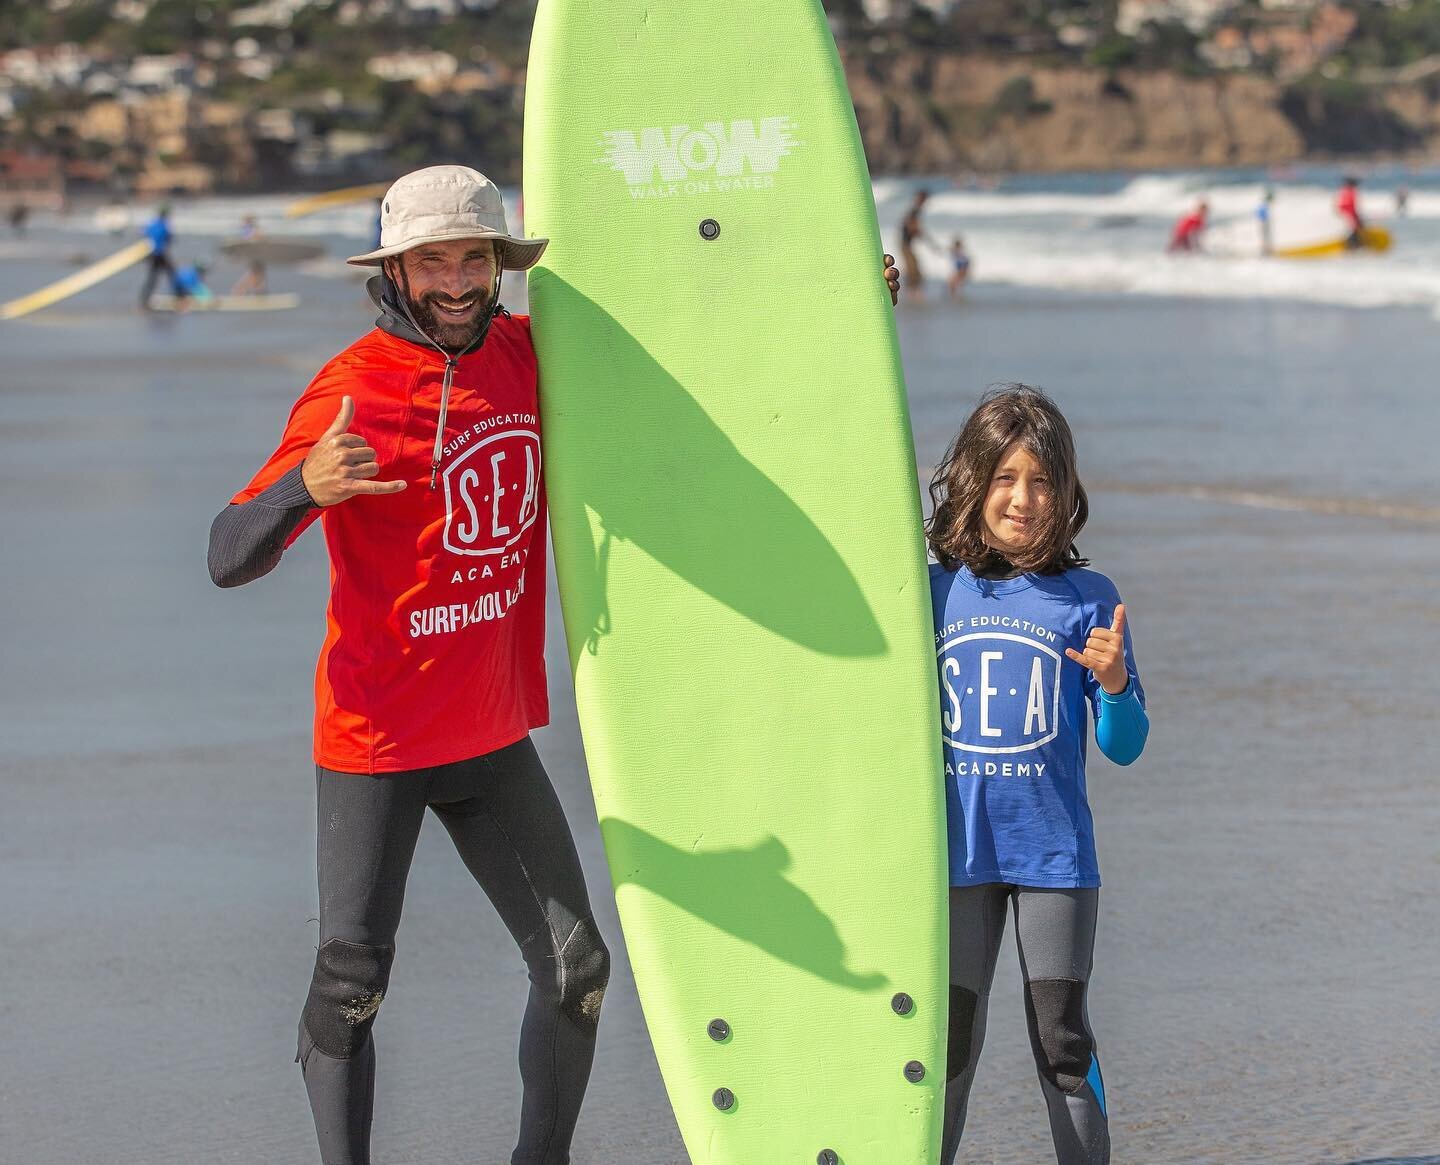 We do more than just surf camps! Did you know we also offer Private Surf Lessons? Check out little Quinn here, who was referred to us from @birdssurfshed , and has been taking advantages of our packages of surf lessons to get customized instruction a